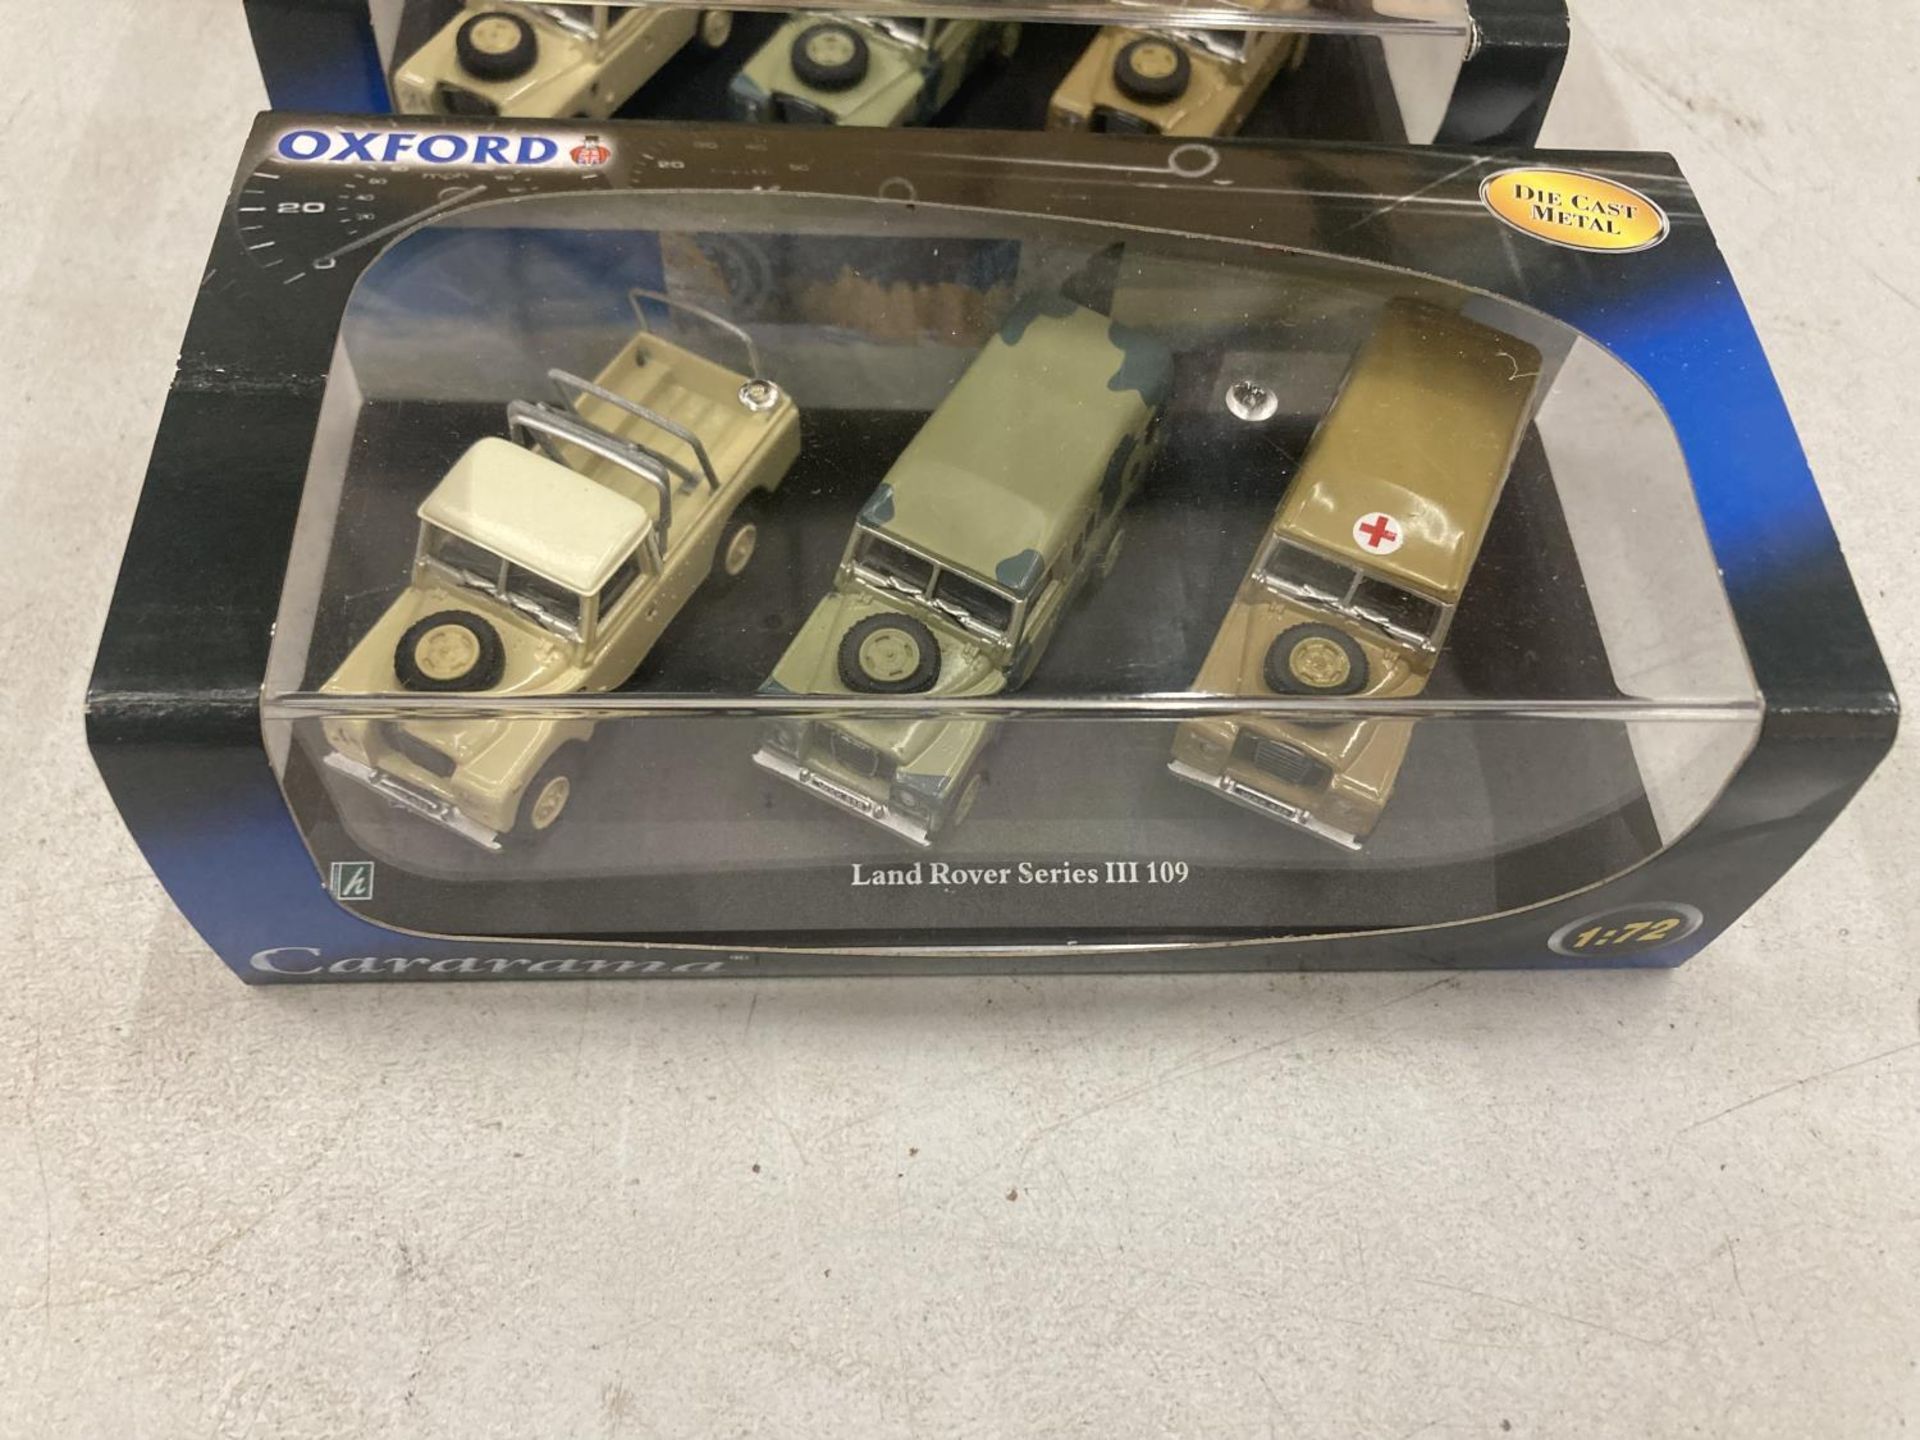 FOUR BOXED OXFORD MILITARY SERIES VEHICLES TO INCLUDE TWO WITH THREE LAND ROVERS IN EACH - Image 3 of 5